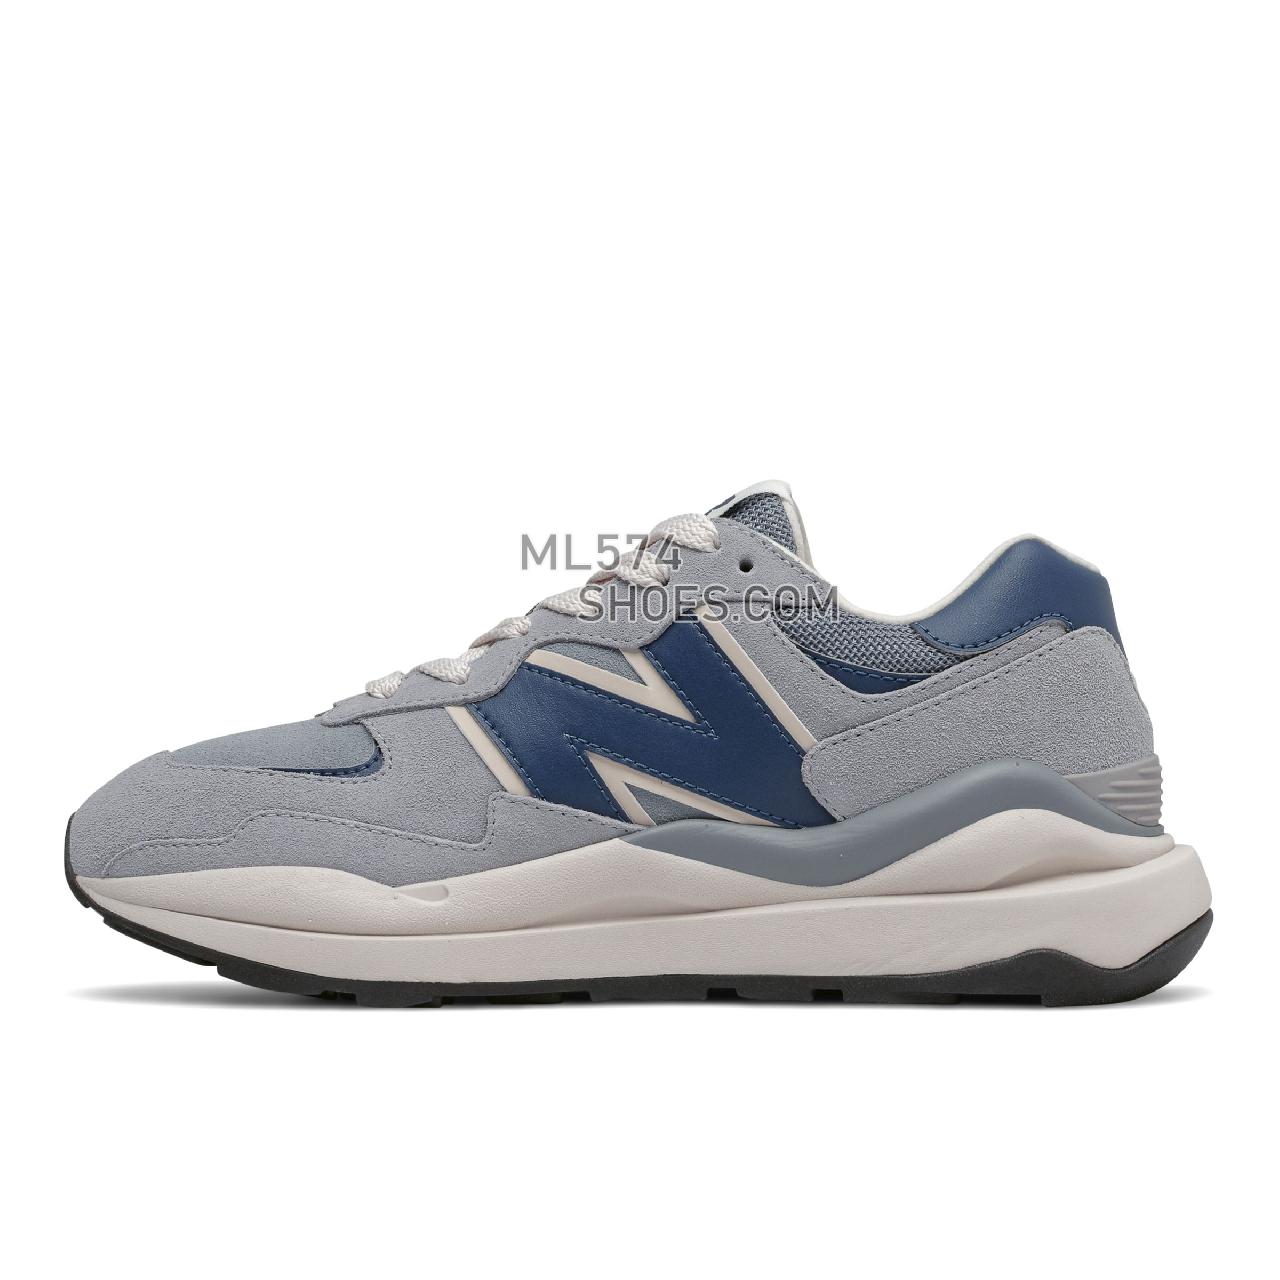 New Balance 57/40 - Women's Sport Style Sneakers - Eclipse with Metallic Gold - W5740LX1